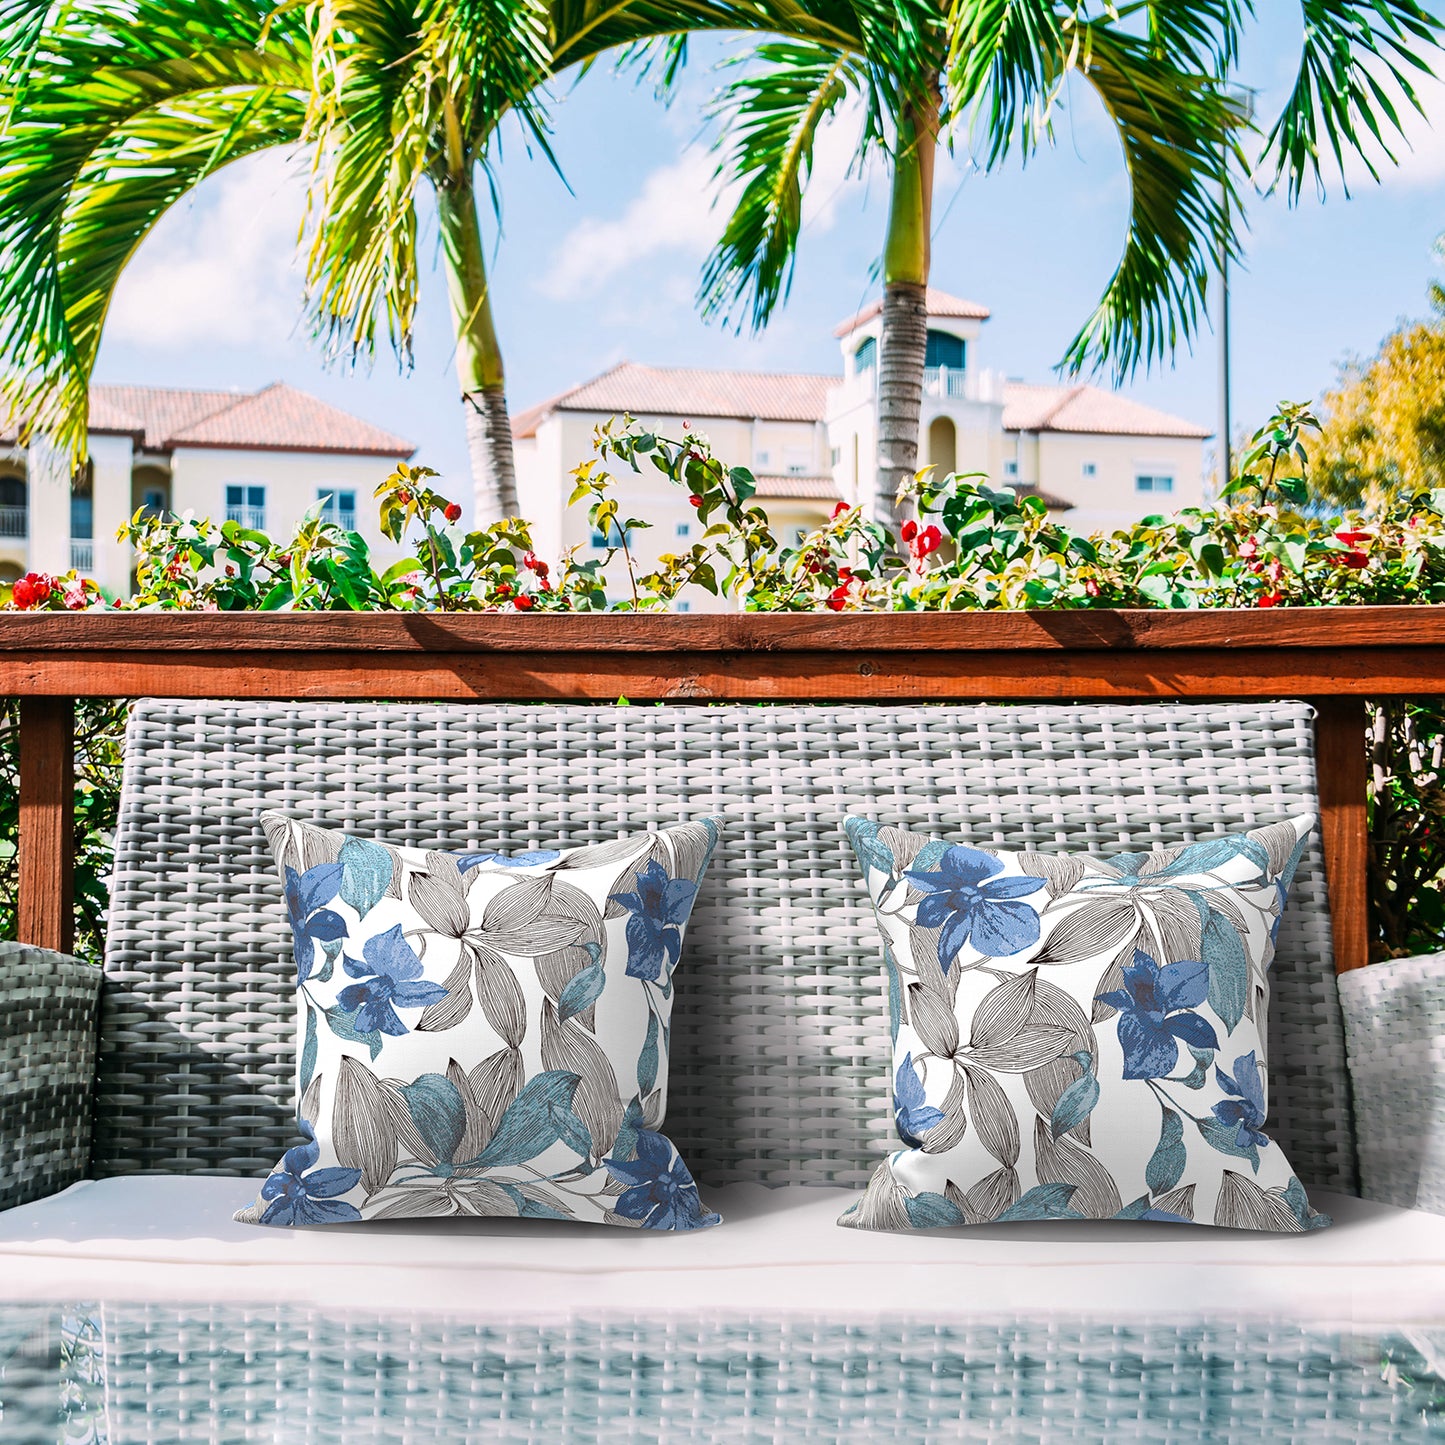 Melody Elephant Patio Throw Pillows with Inners, Fade Resistant Square Pillow Pack of 2, Decorative Garden Cushions for Home, 18x18 Inch, Clemens Blue